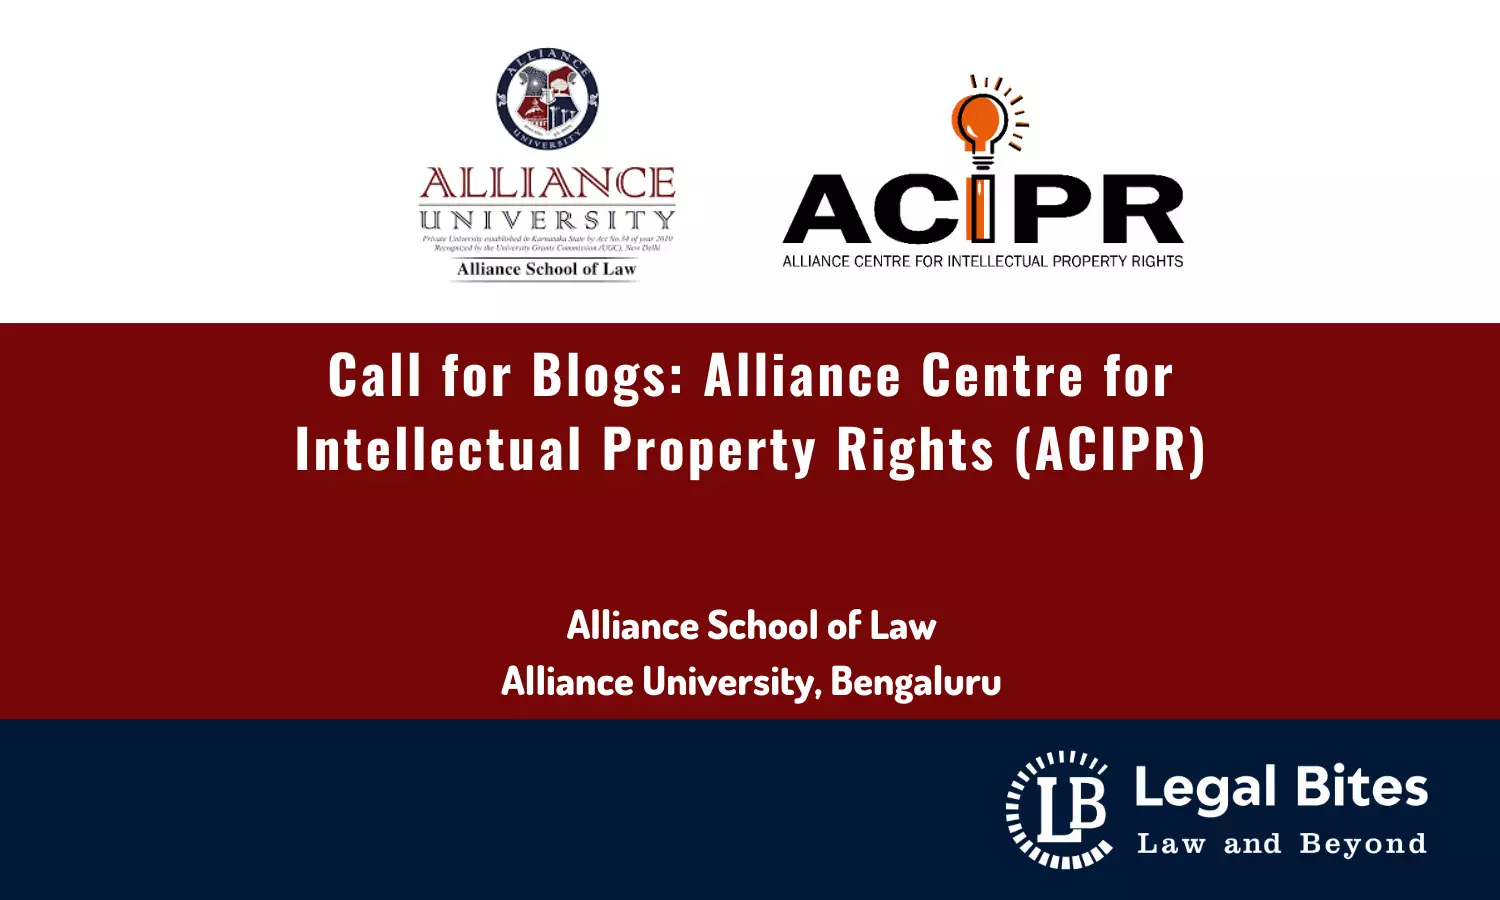 Call for Blogs: Alliance Centre for Intellectual Property Rights (ACIPR), Alliance University [ACIPR Blog]